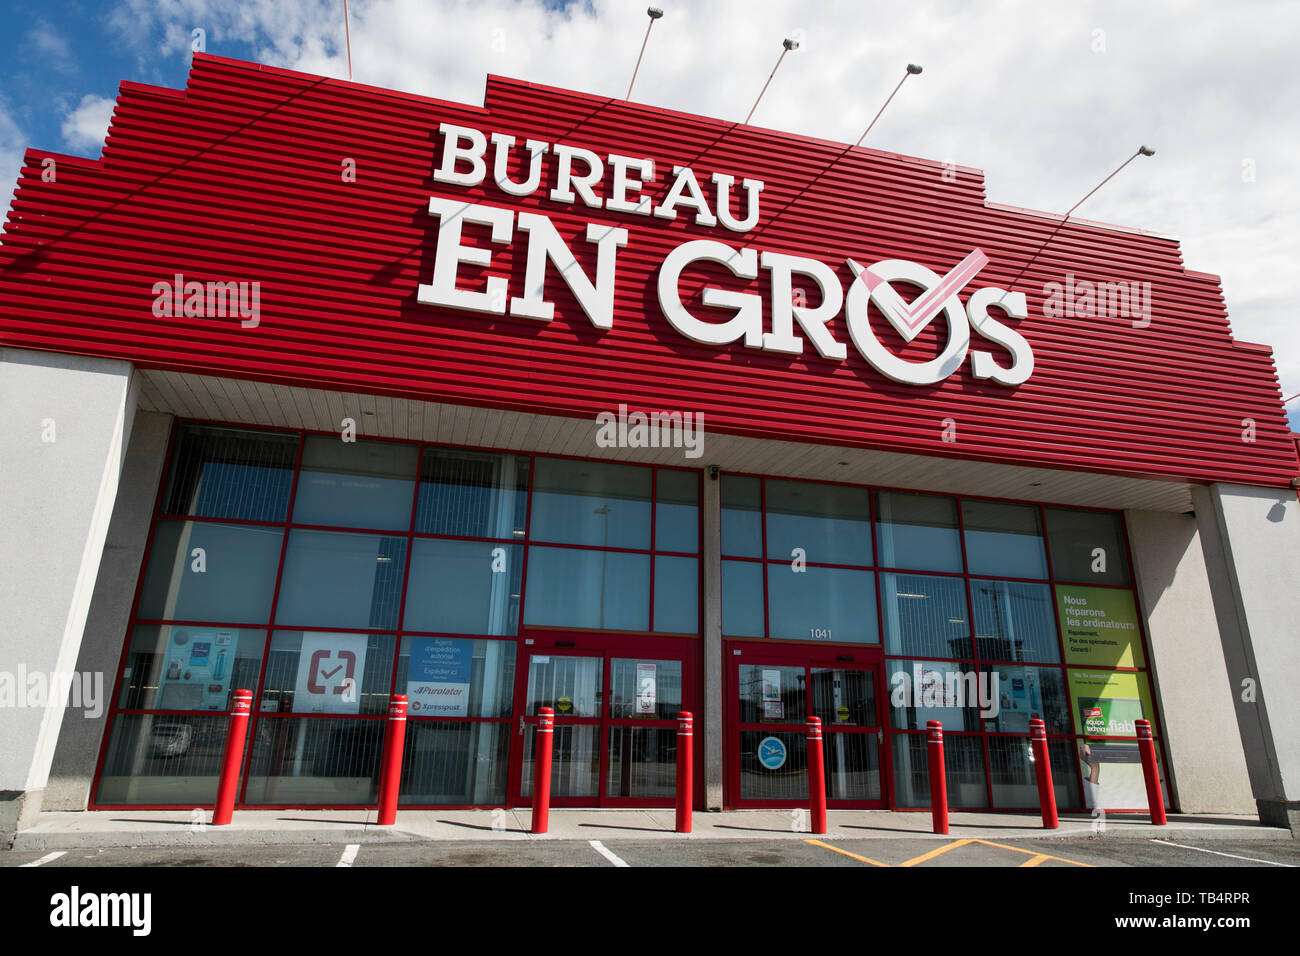 A logo sign outside of a Bureau en Gros (Staples) retail store location in Montreal, Quebec, Canada, on April 21, 2019. Stock Photo